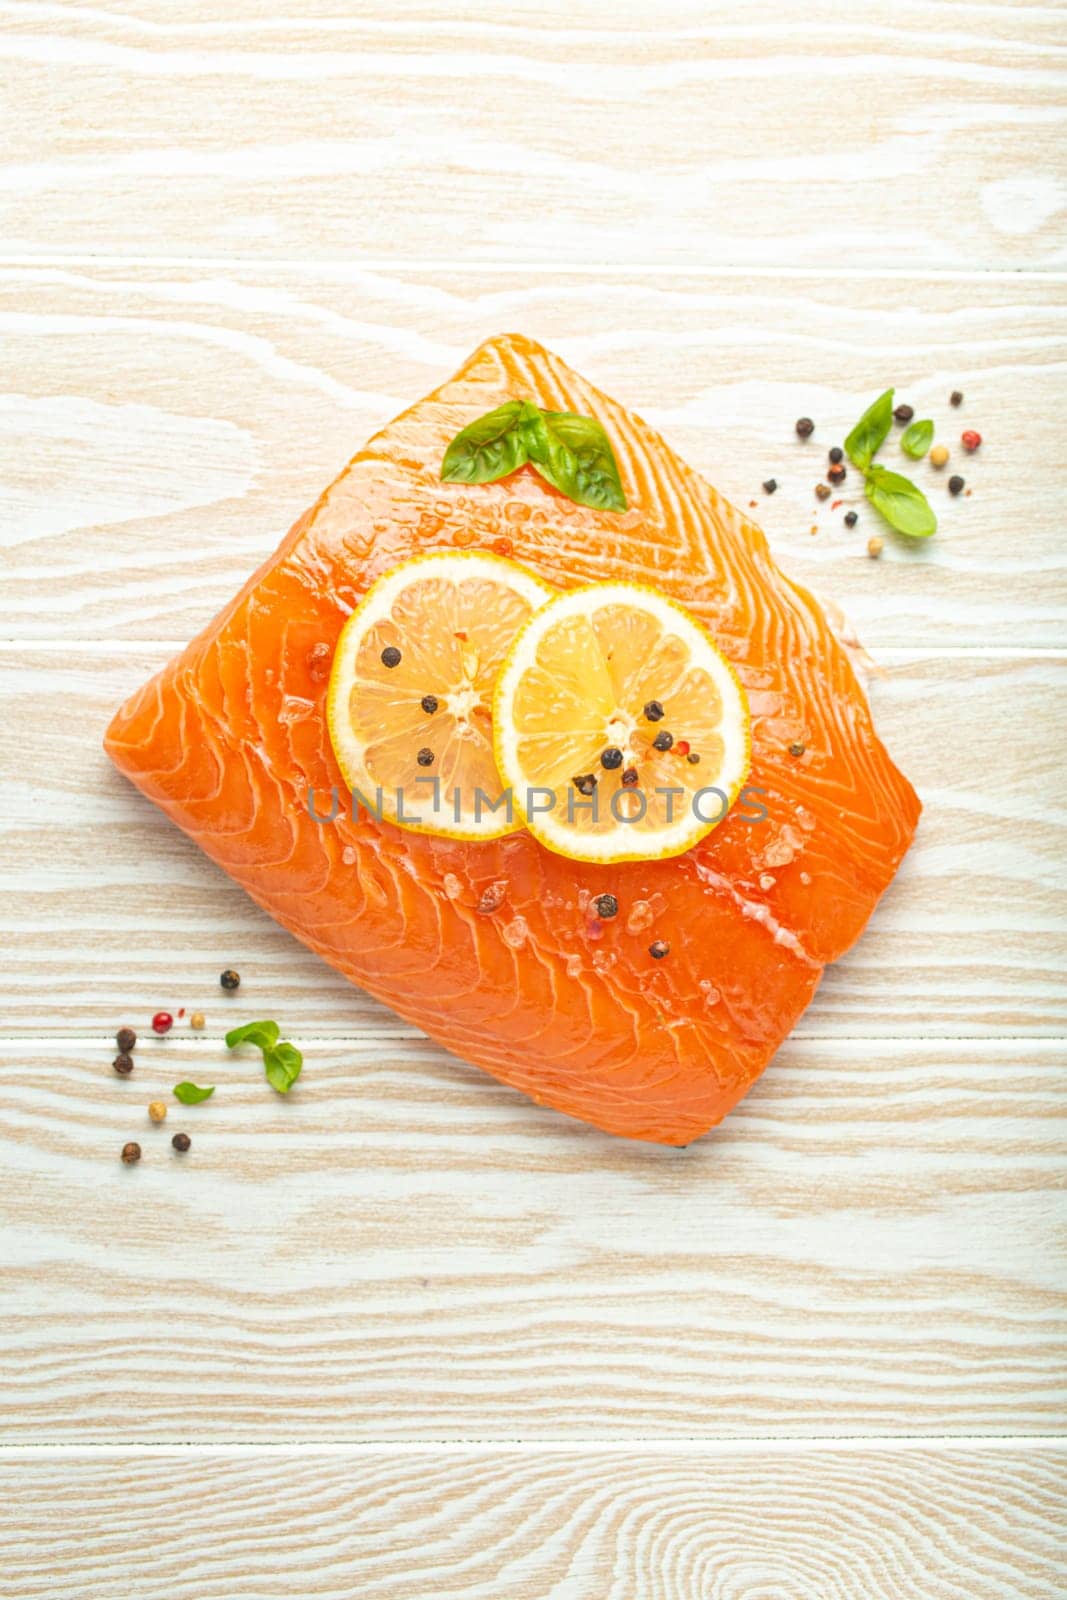 Fresh raw salmon marbled fillet on white rustic wooden table background with lemon, coarse salt, green herbs top view. Healthy cooking and balanced diet.